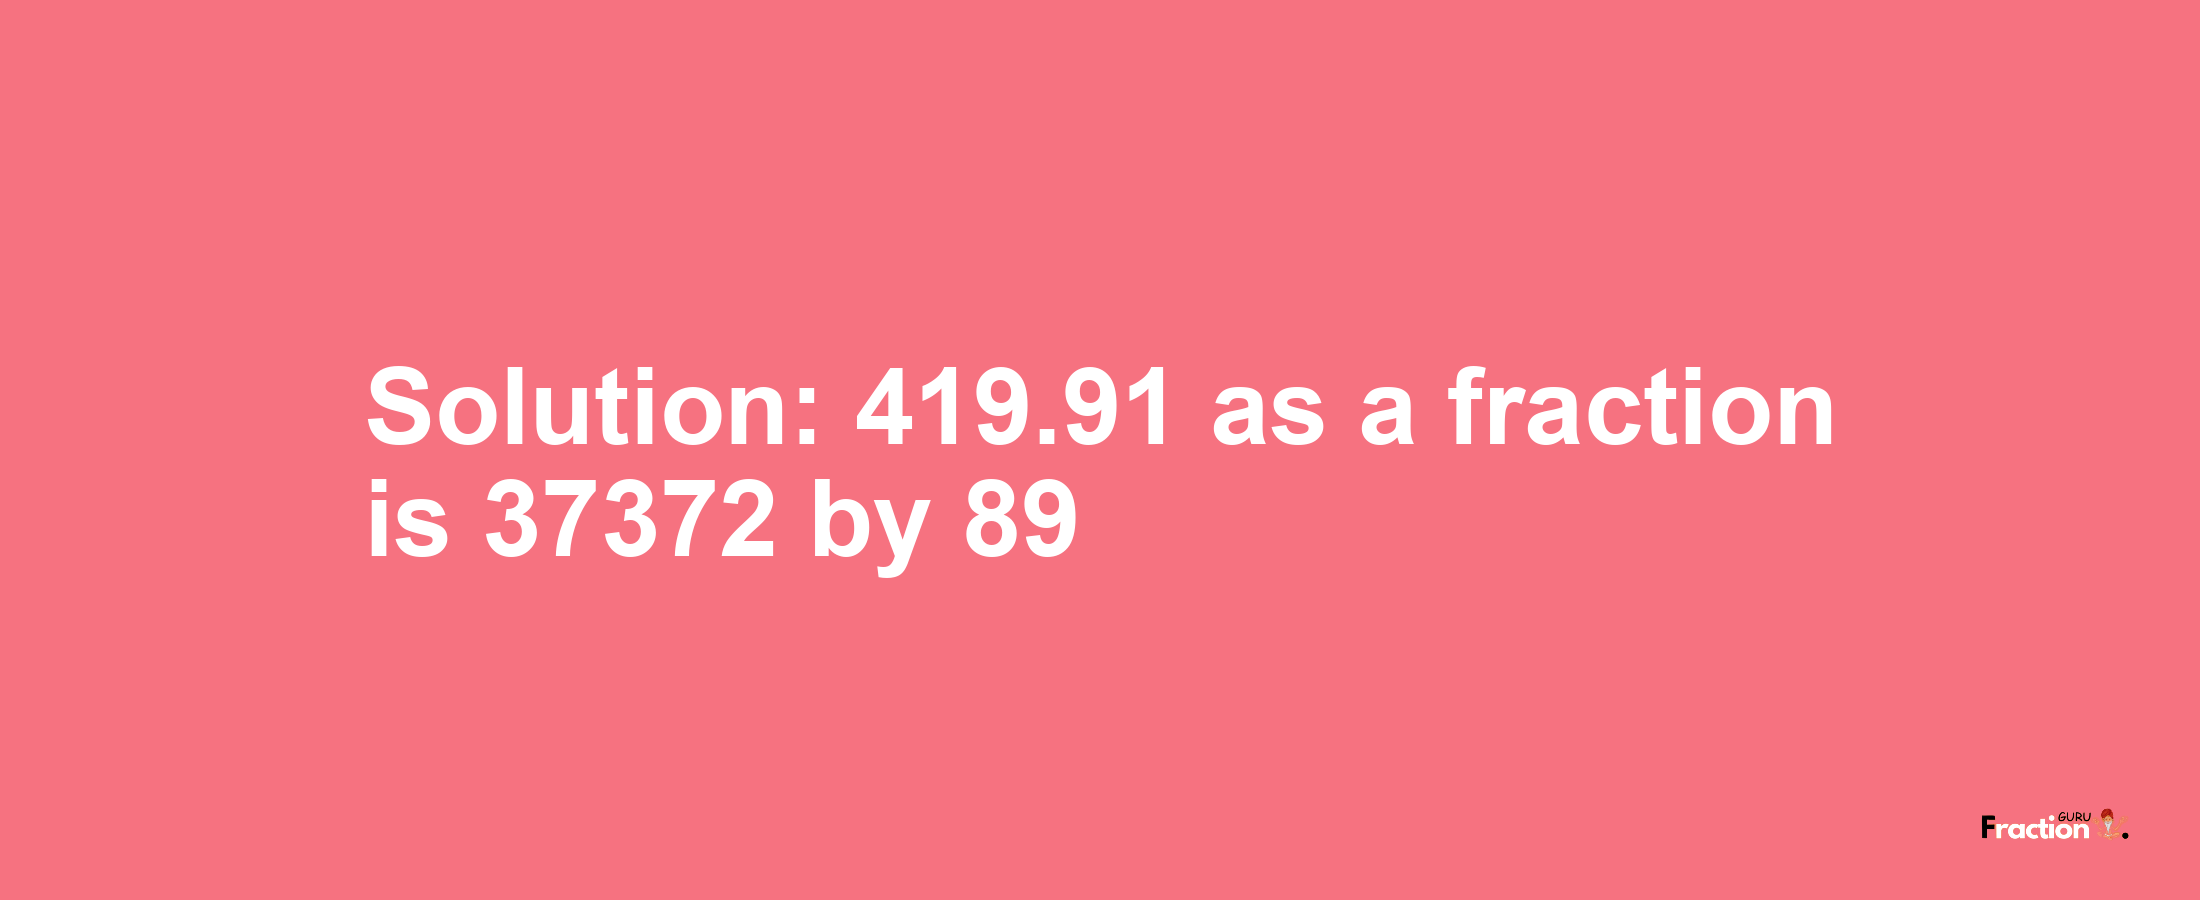 Solution:419.91 as a fraction is 37372/89